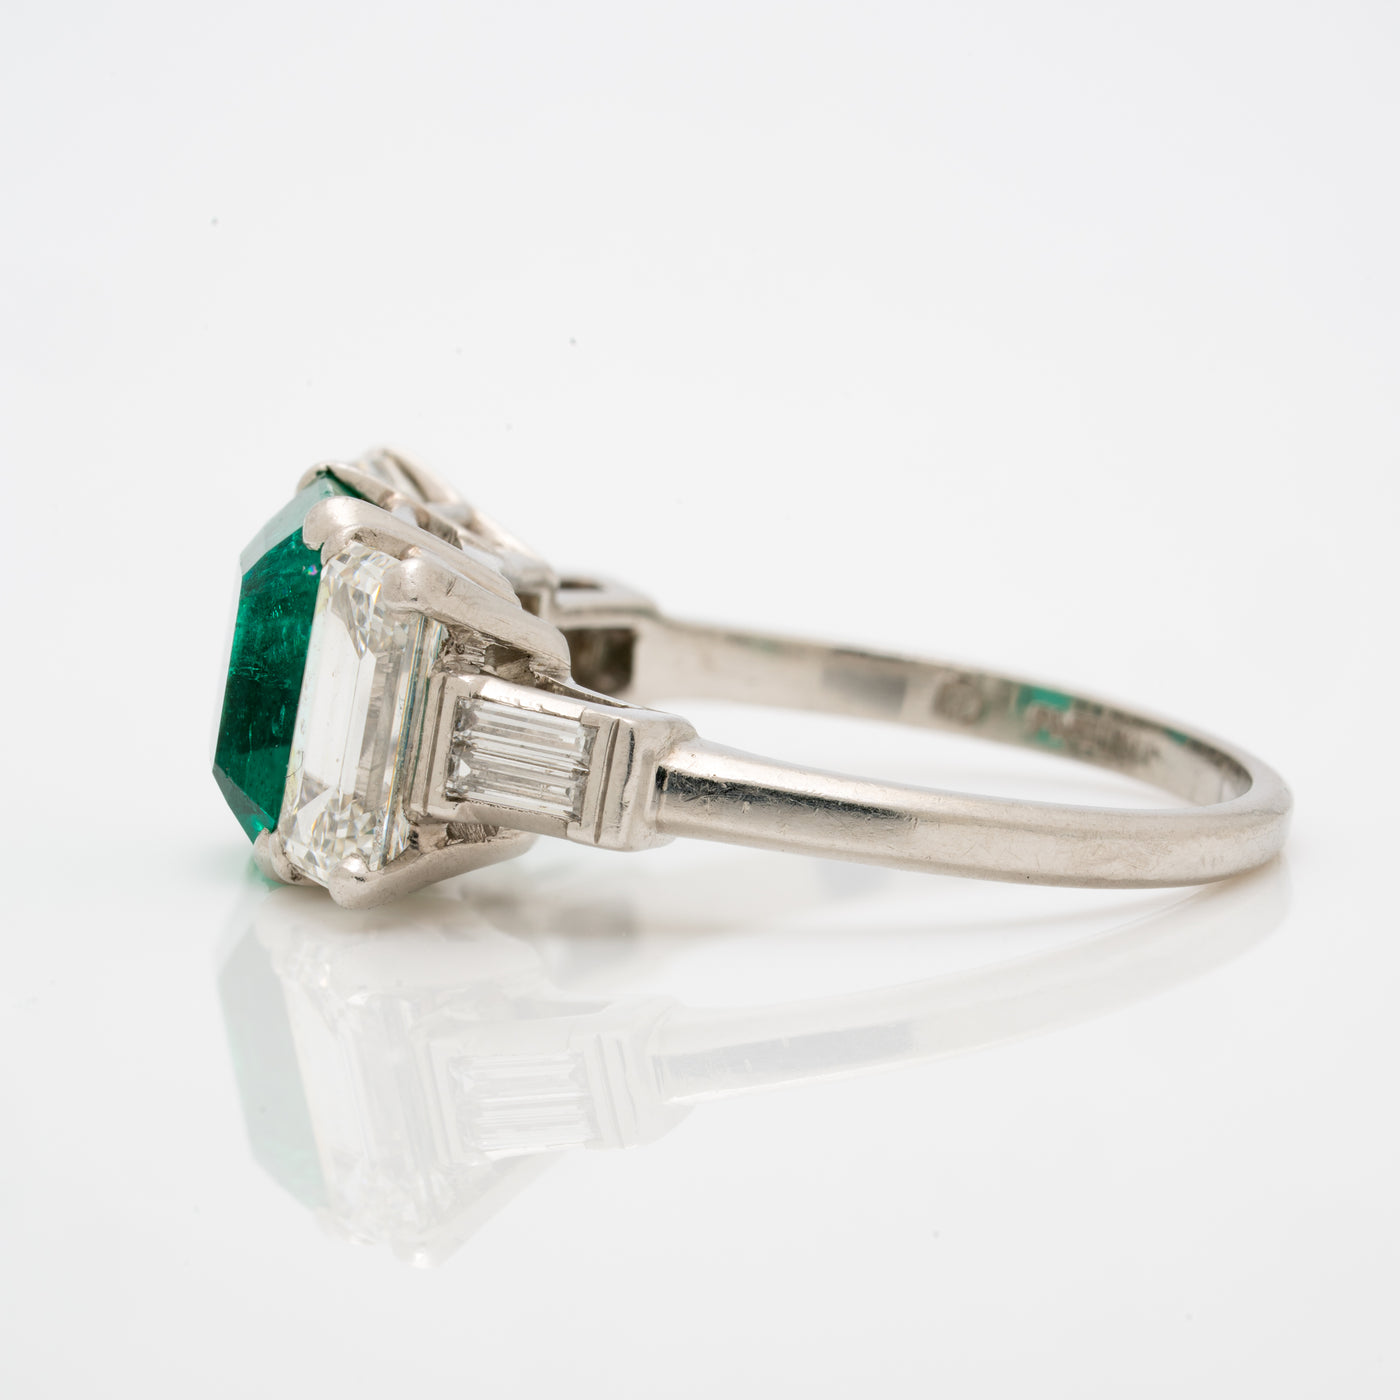 VINTAGE PLATINUM 1.20ct COLOMBIAN EMERALD AND 1.10ct EMERALD CUT DIAMOND RING c.1950s